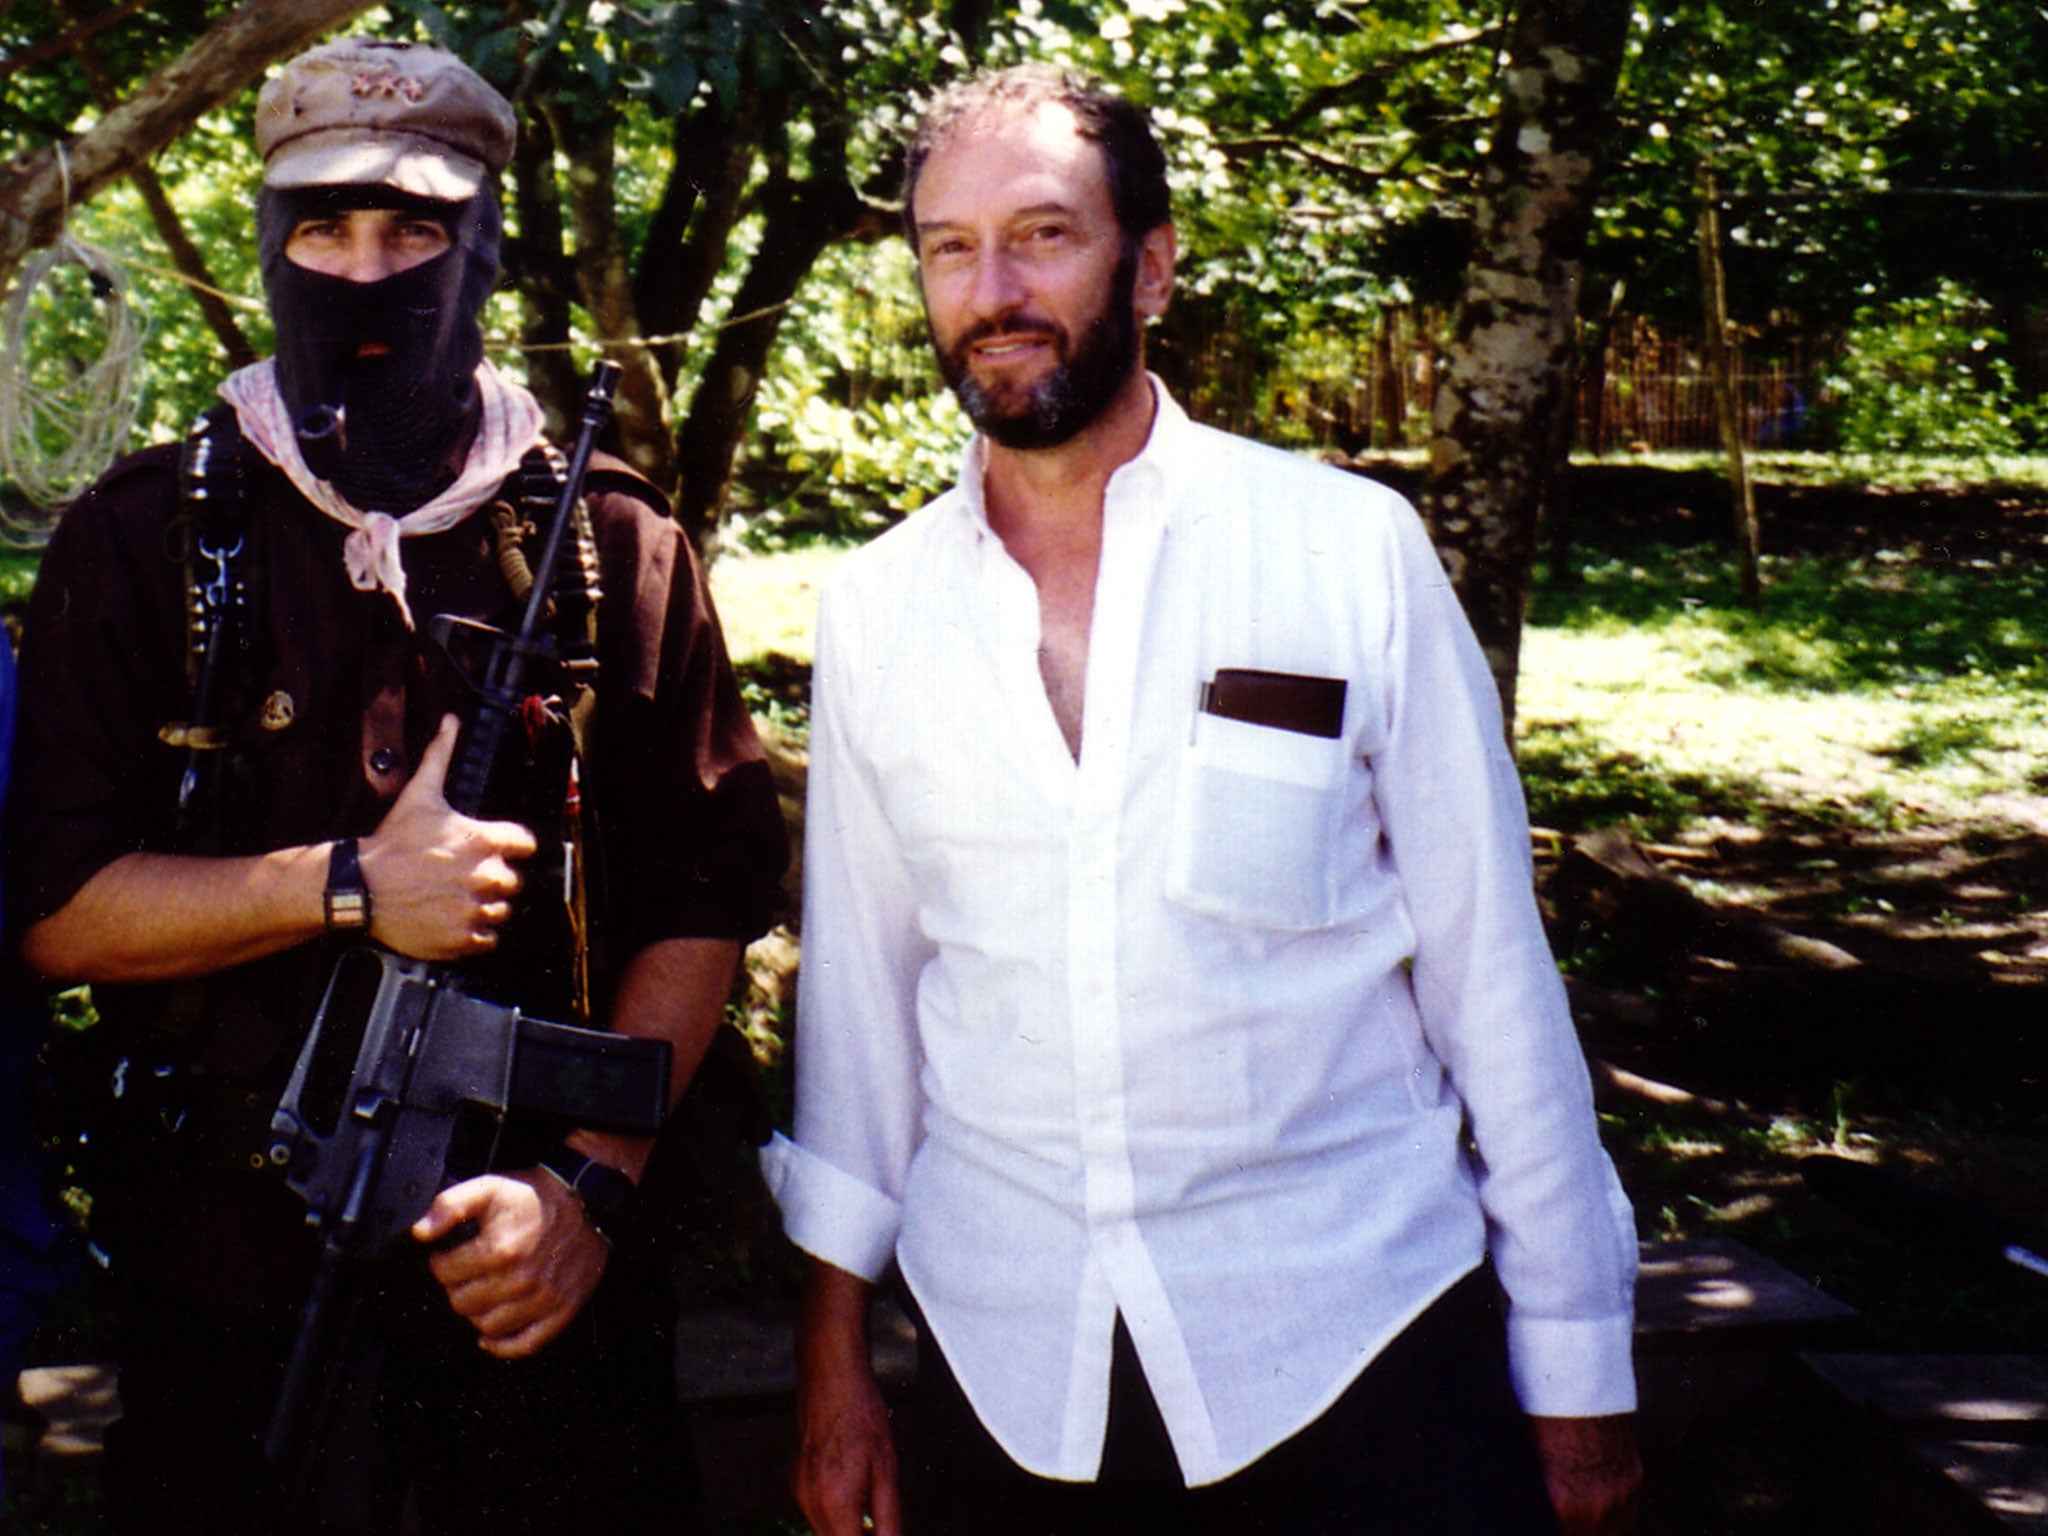 Deceased American filmmaker Saul Landau (r) meets Subcomandante Marcos, the leader of the Zapatista Army of National Liberation in 1995